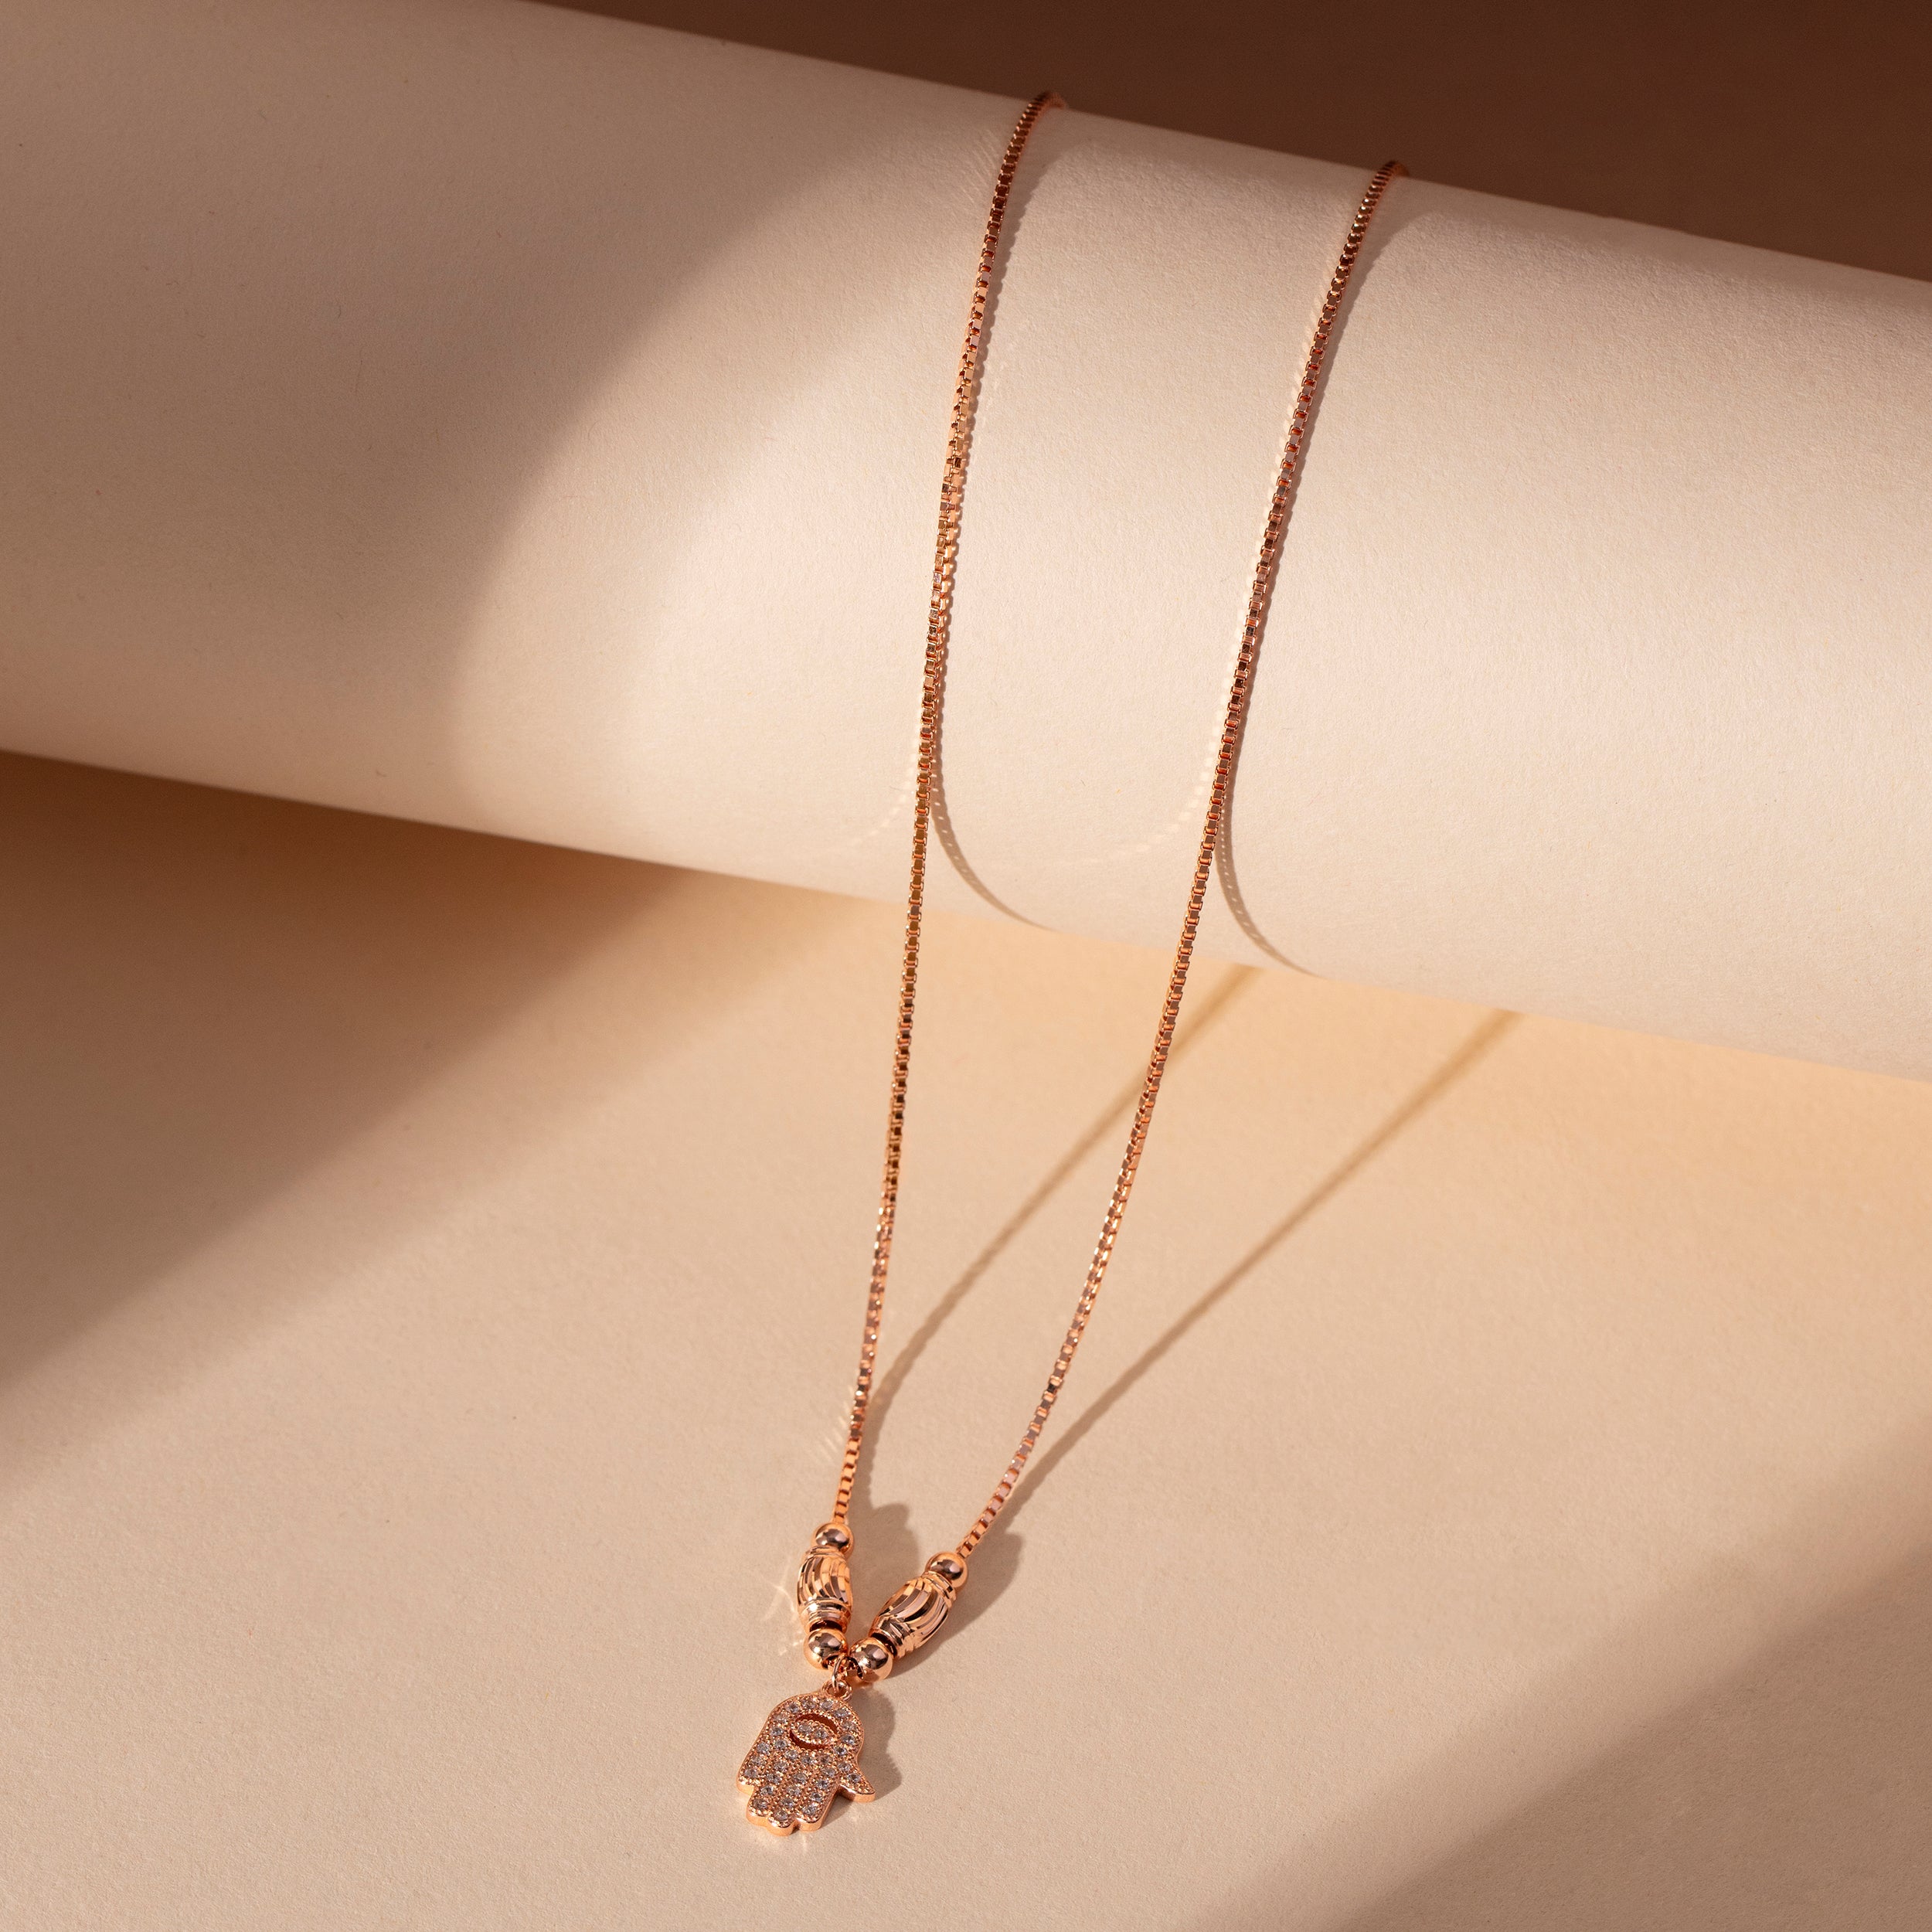 Harmony of Metals: Rose Gold  Chain Necklace | SKU : 0019272238, 0019272337